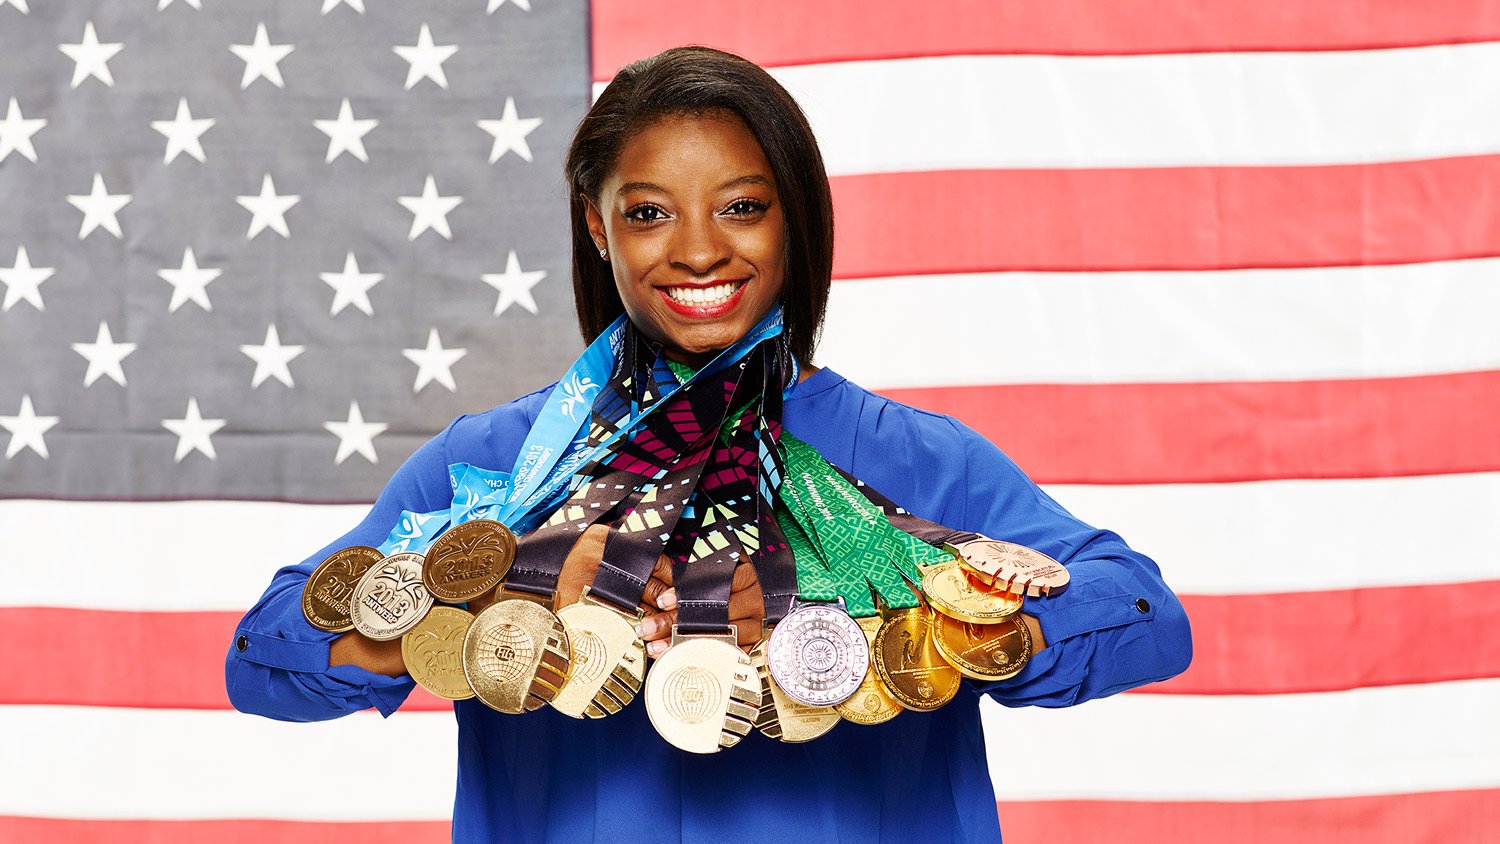 Happy Birthday to the beautiful and talented Simone Biles. The Olympic Medalist turns 20 today! 